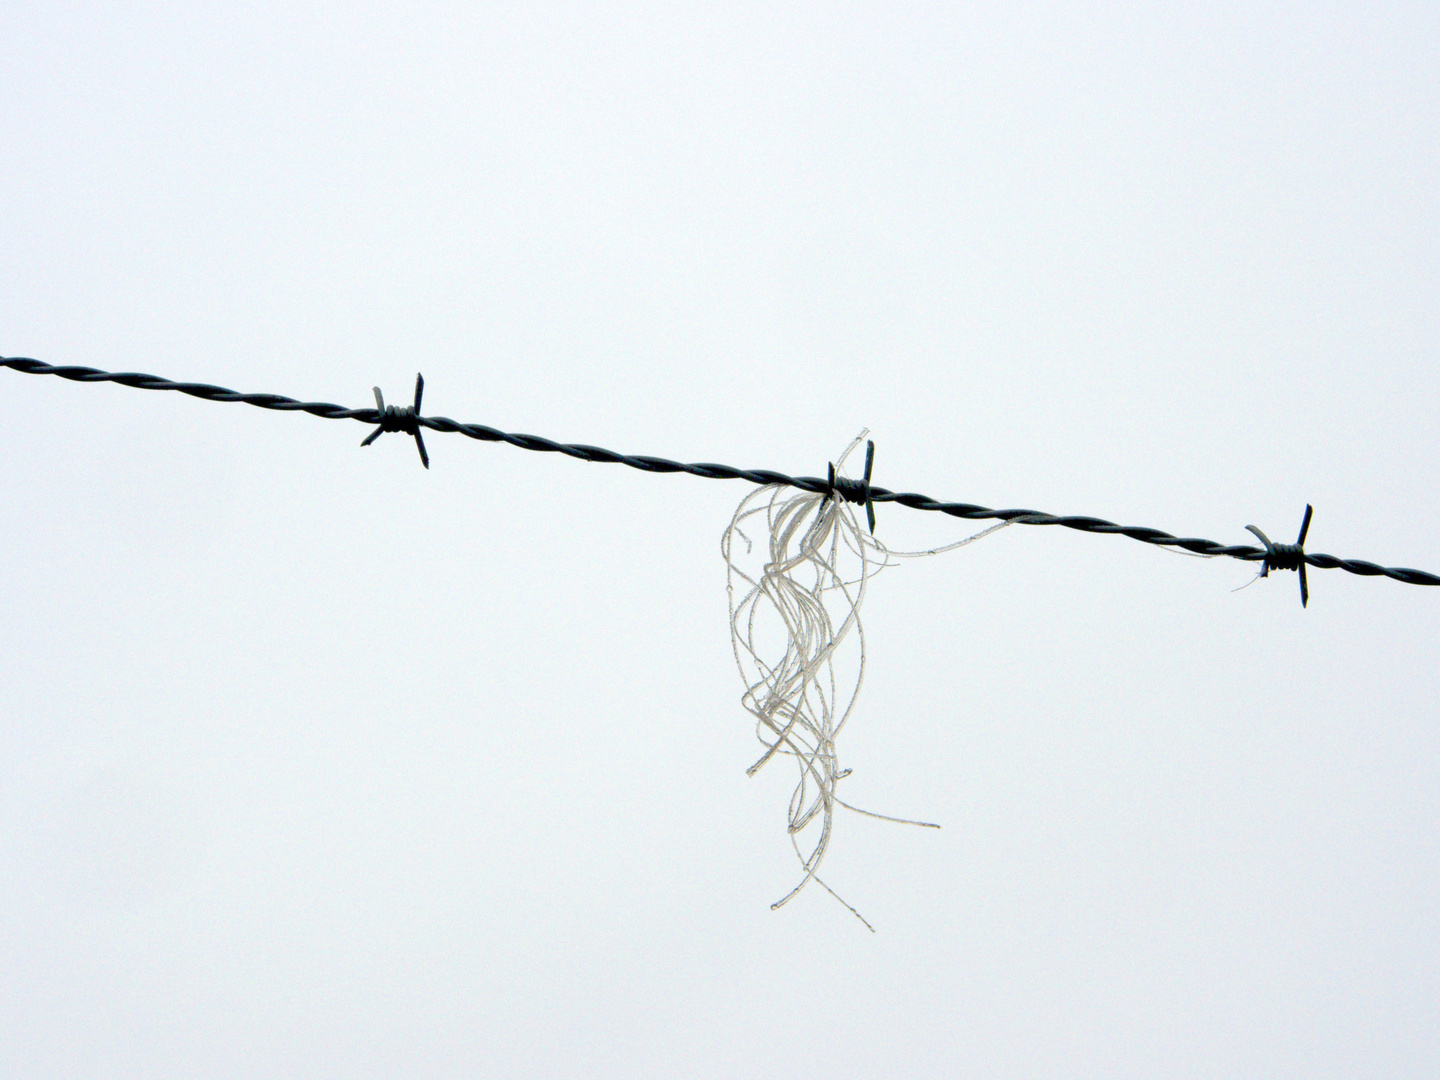 barbed wire 1